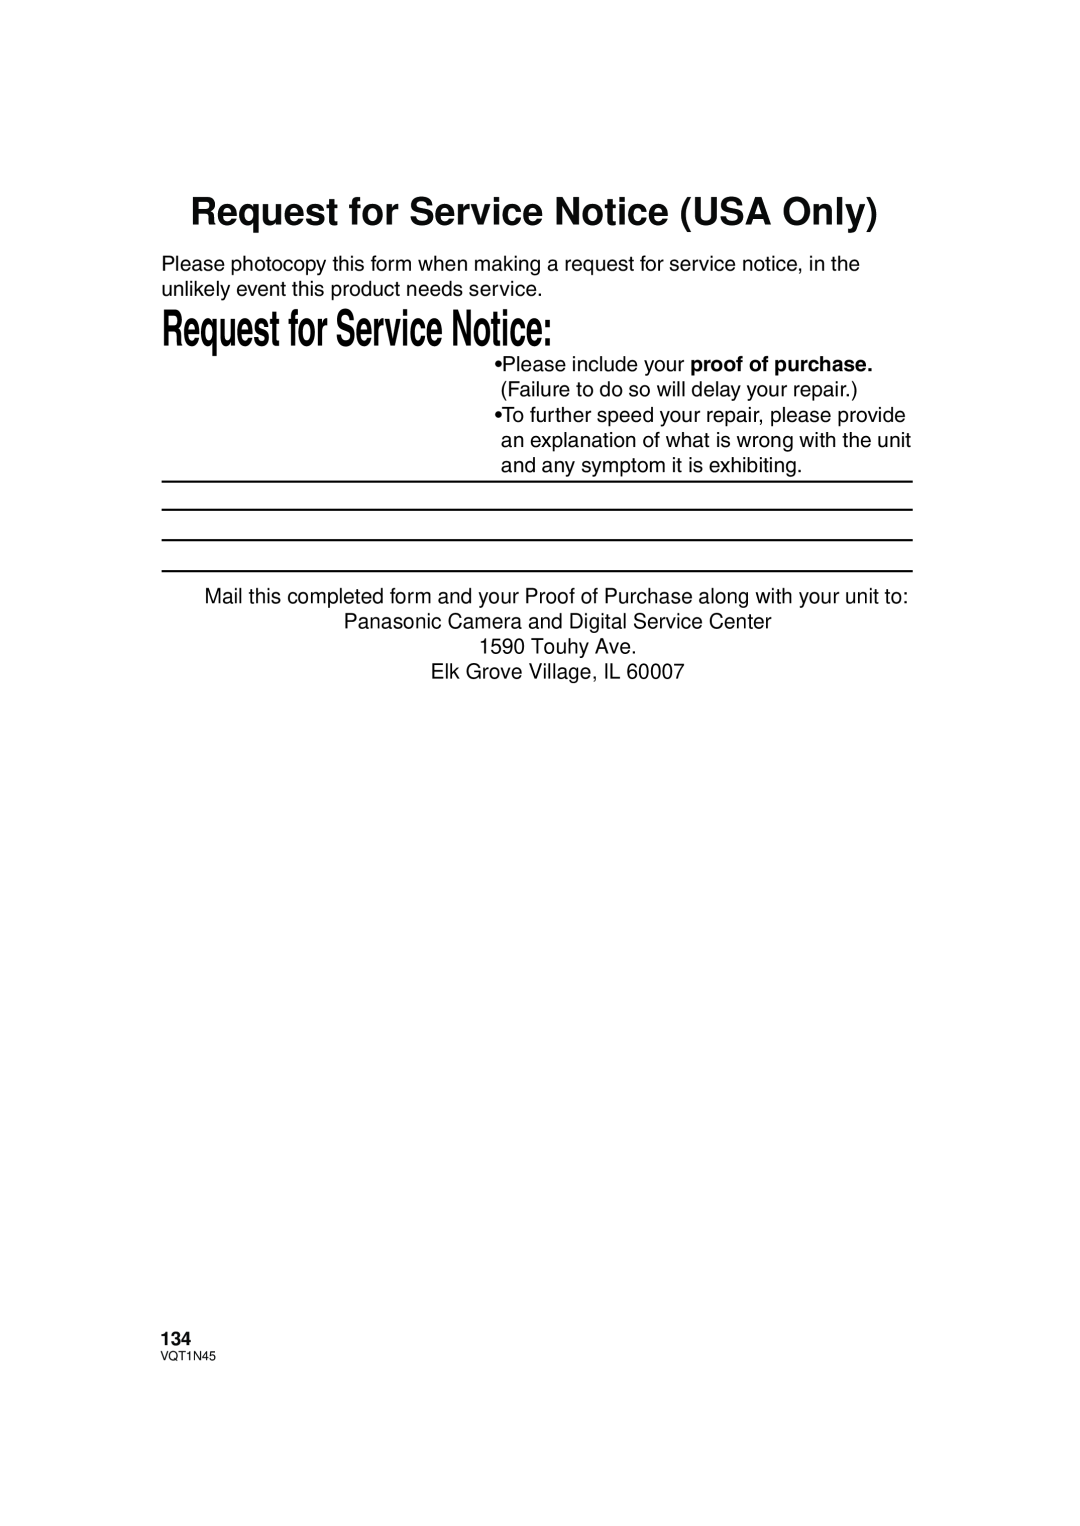 Panasonic HDC-SD9PC manual Request for Service Notice USA Only 